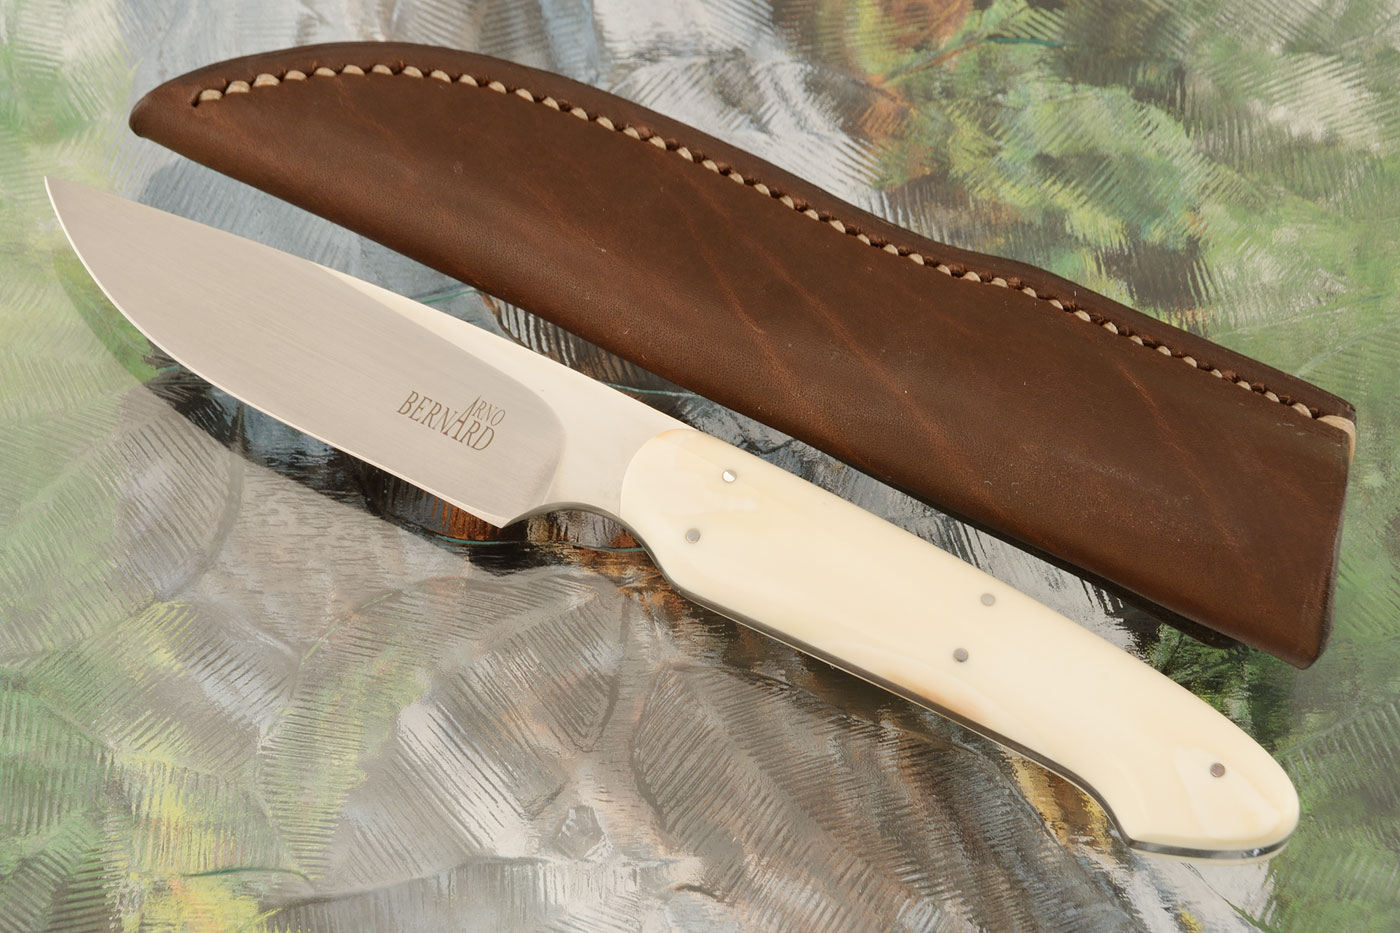 Utility/Hunter with Warthog Tusk - S35VN